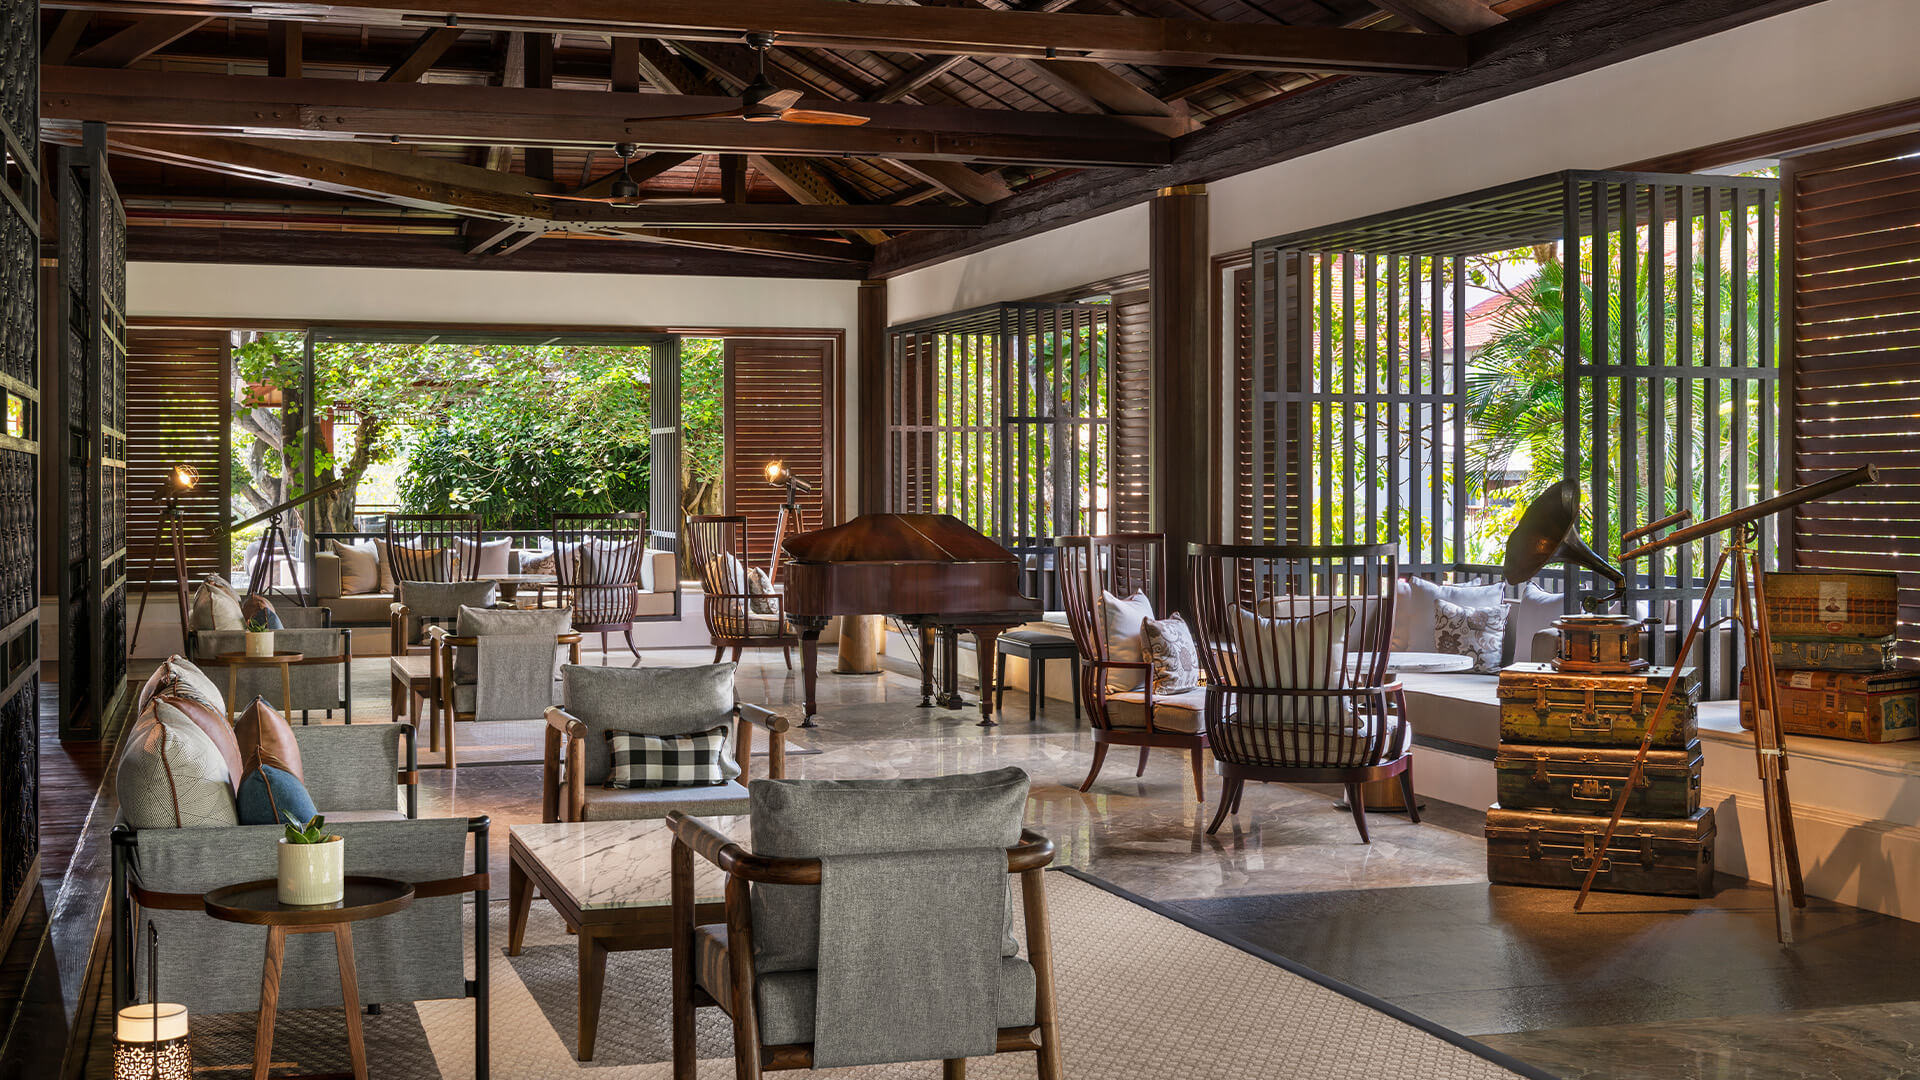 A lobby sitting area at The Laguna Resort with lots of luxury chairs and tables